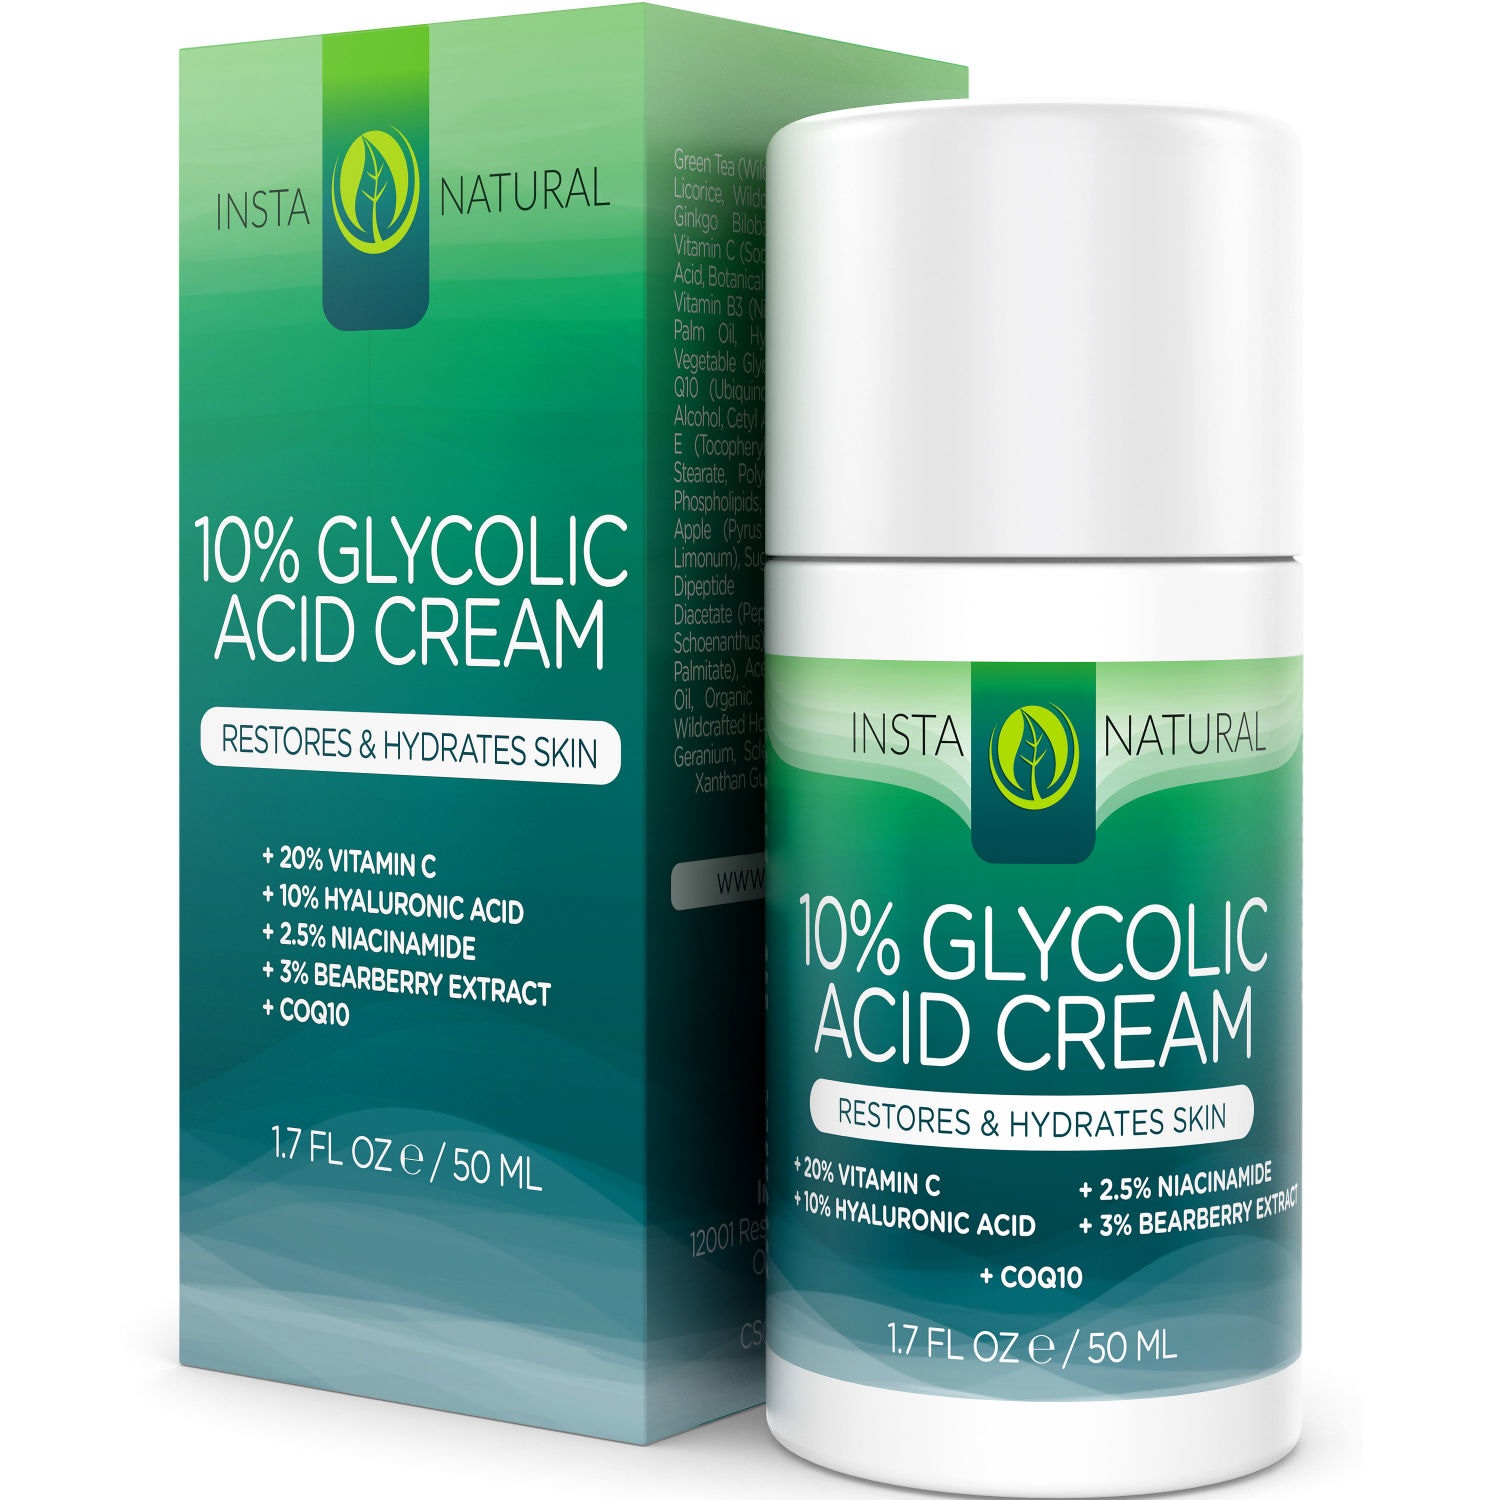 Tart reccomend Facial products with glycolic acid